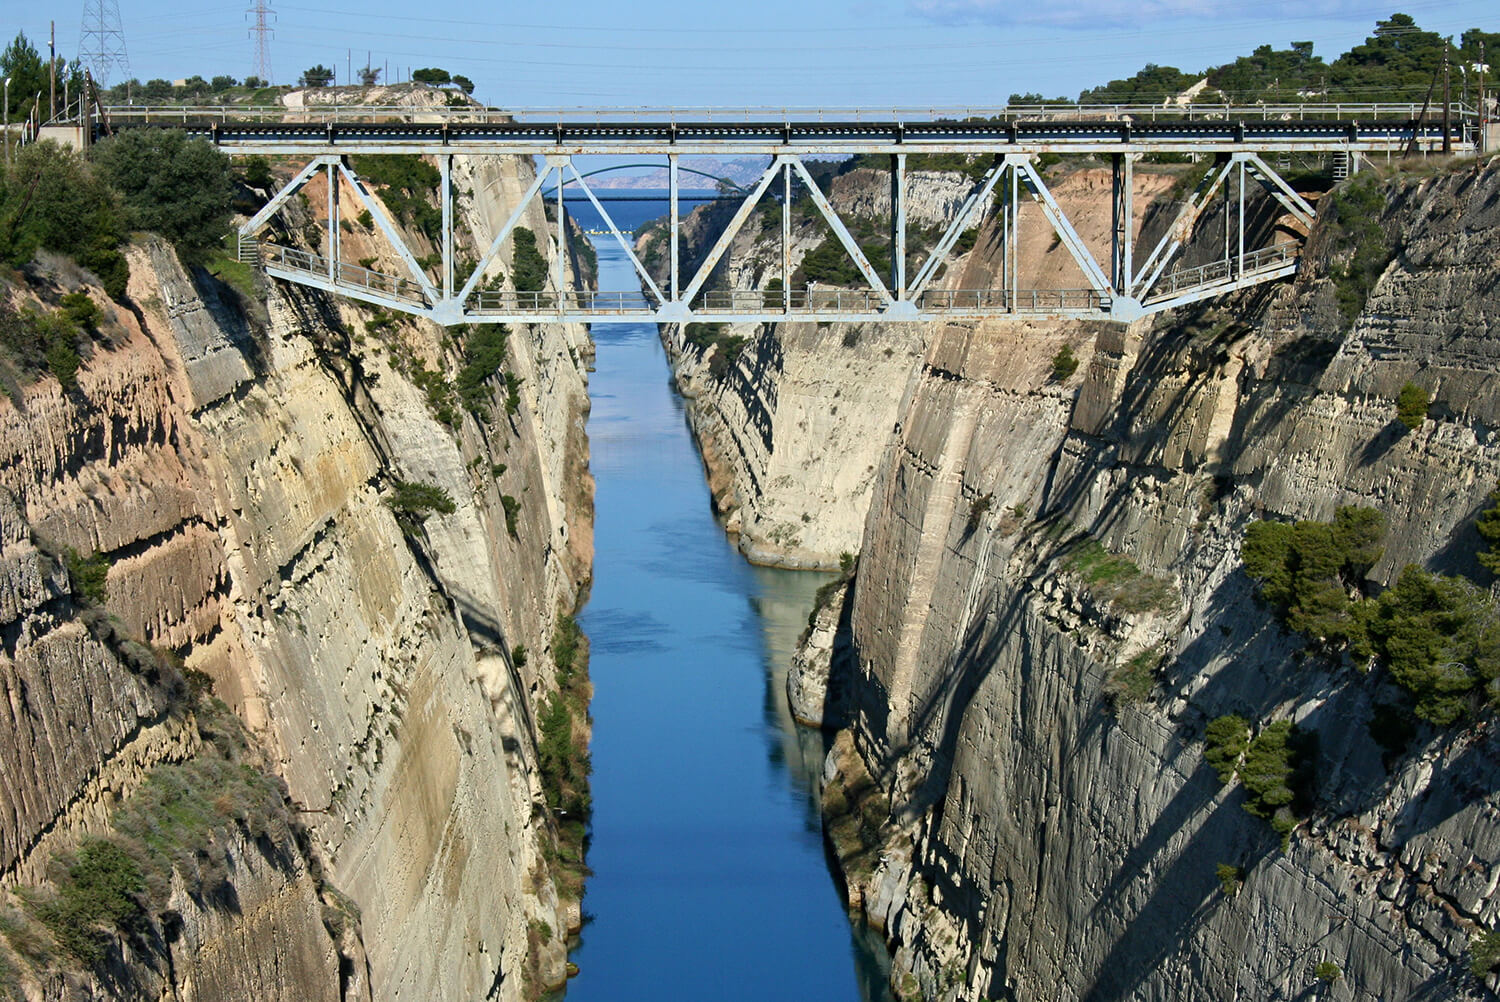 The man-made Corinth Canal